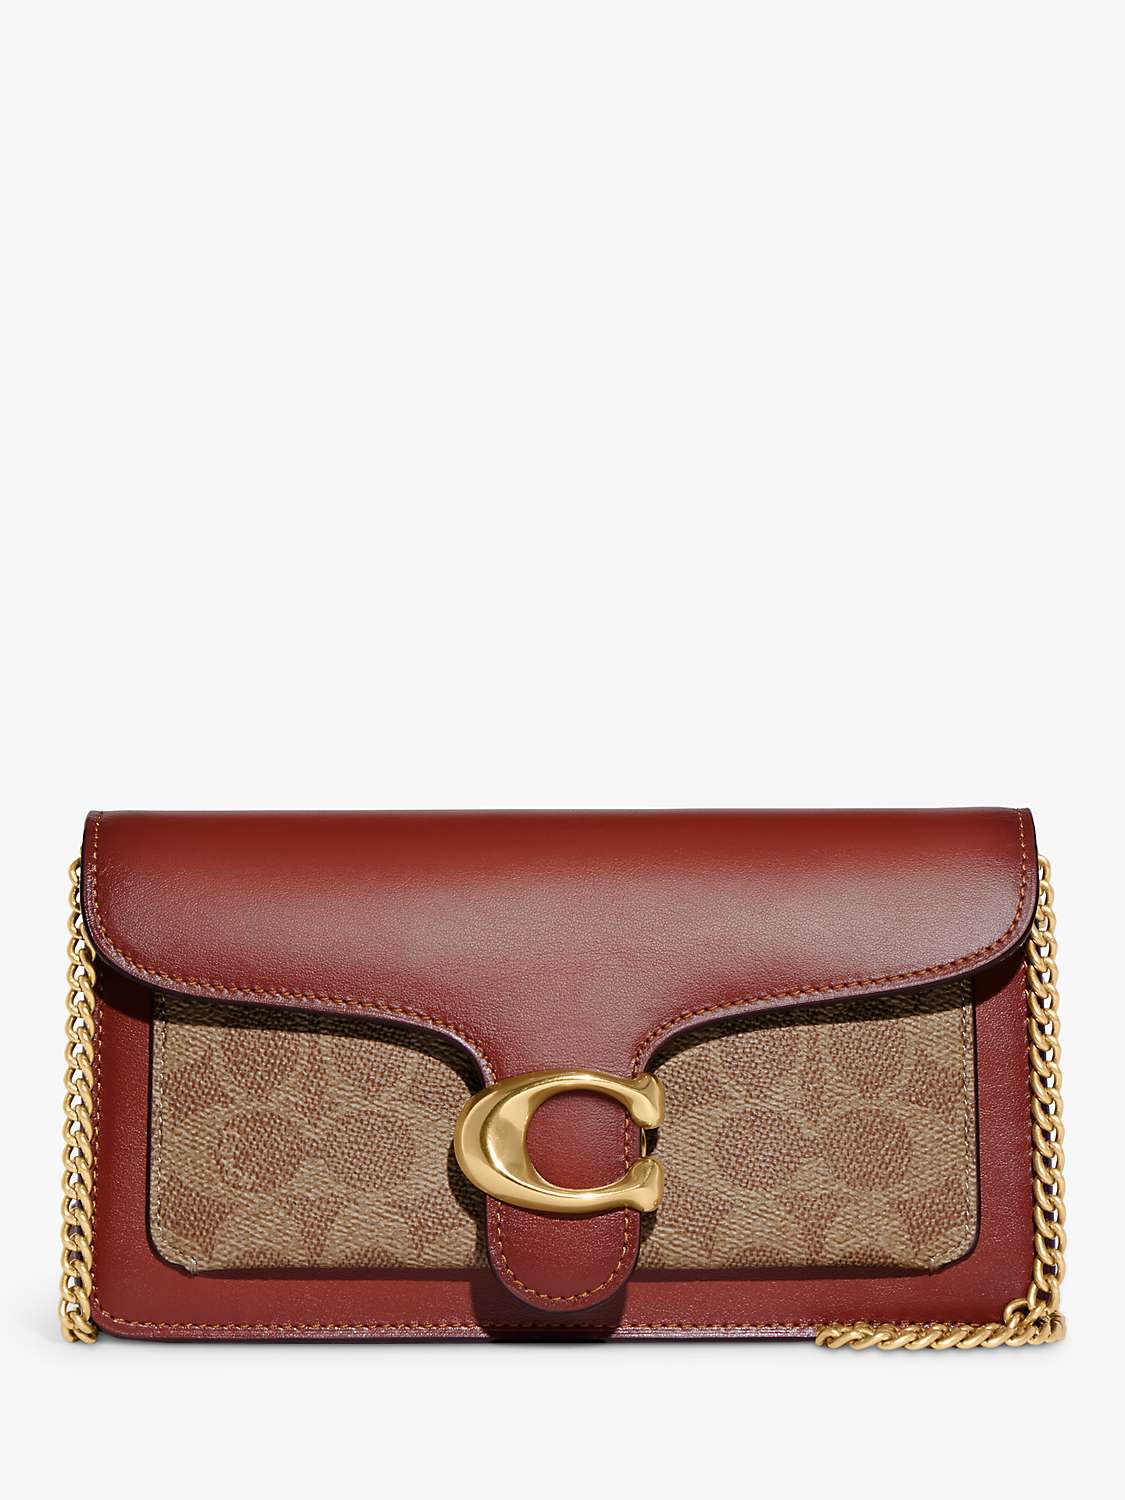 Buy Coach Tabby Signautre Canvas Chain Clutch Bag Online at johnlewis.com